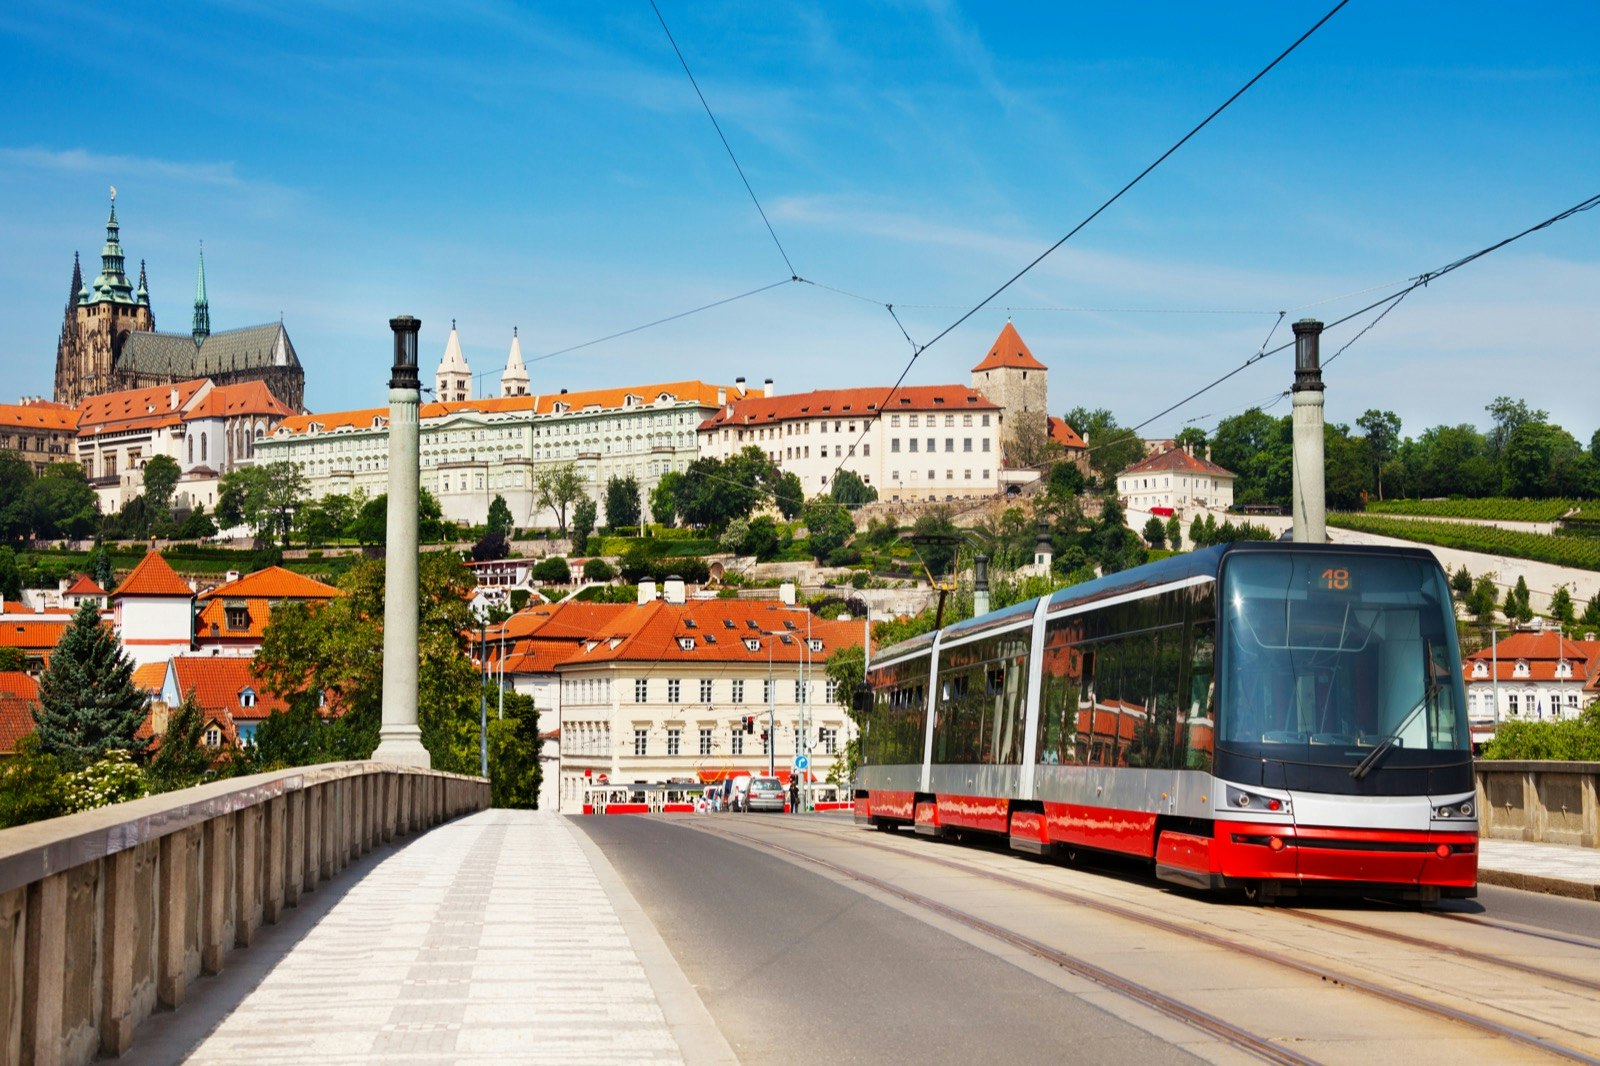 A red and white tram drives down a road with white buildings behind